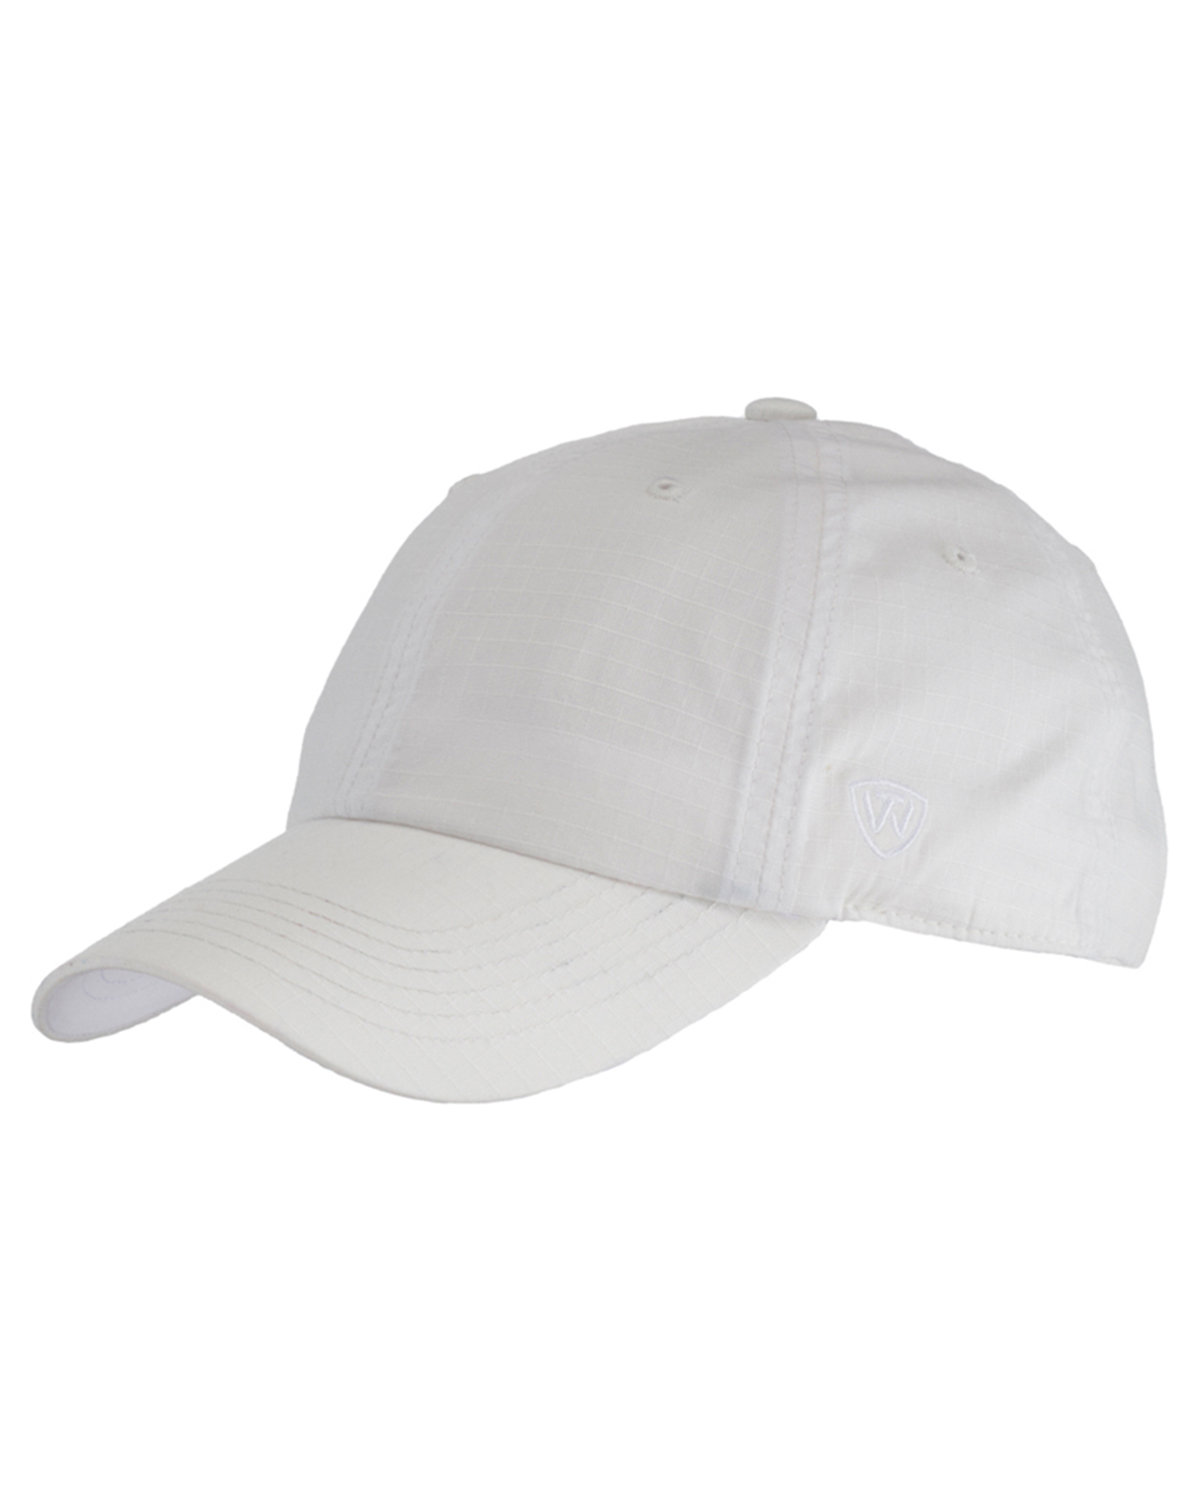 J America Ripper Washed Cotton Ripstop Hat | alphabroder